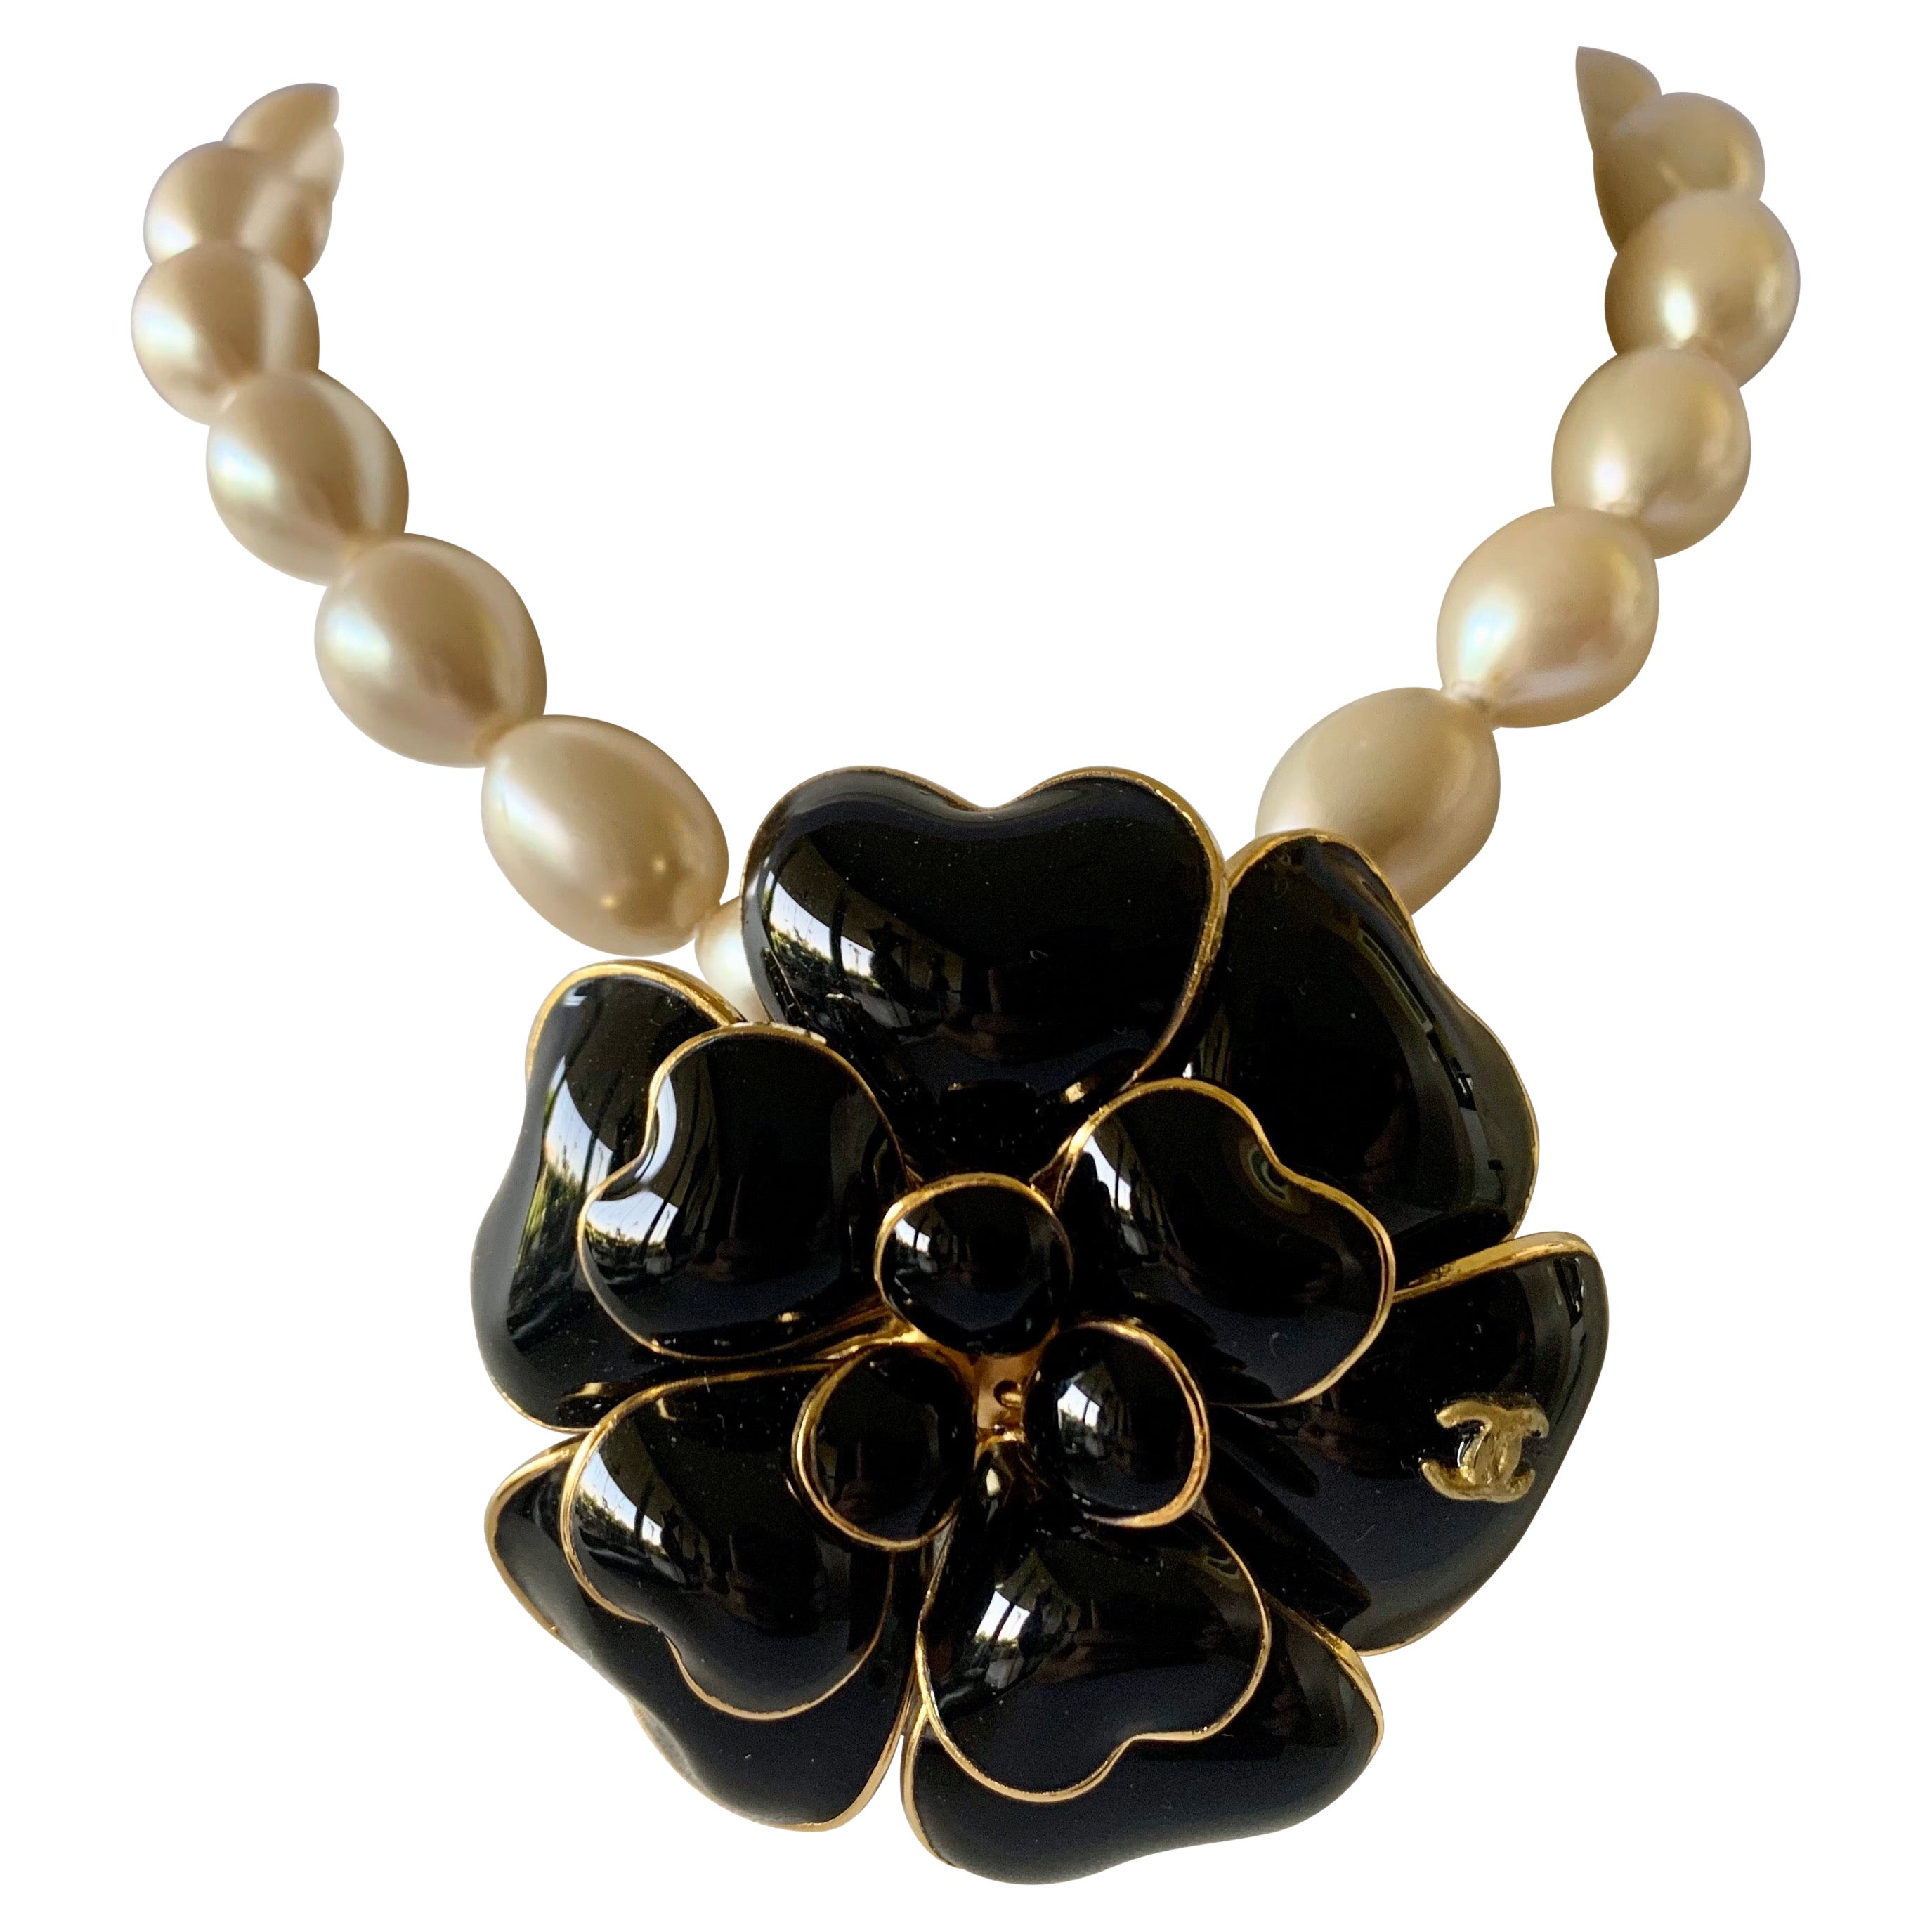 Vintage Chanel Black Camellia CC Statement Pearl Necklace at